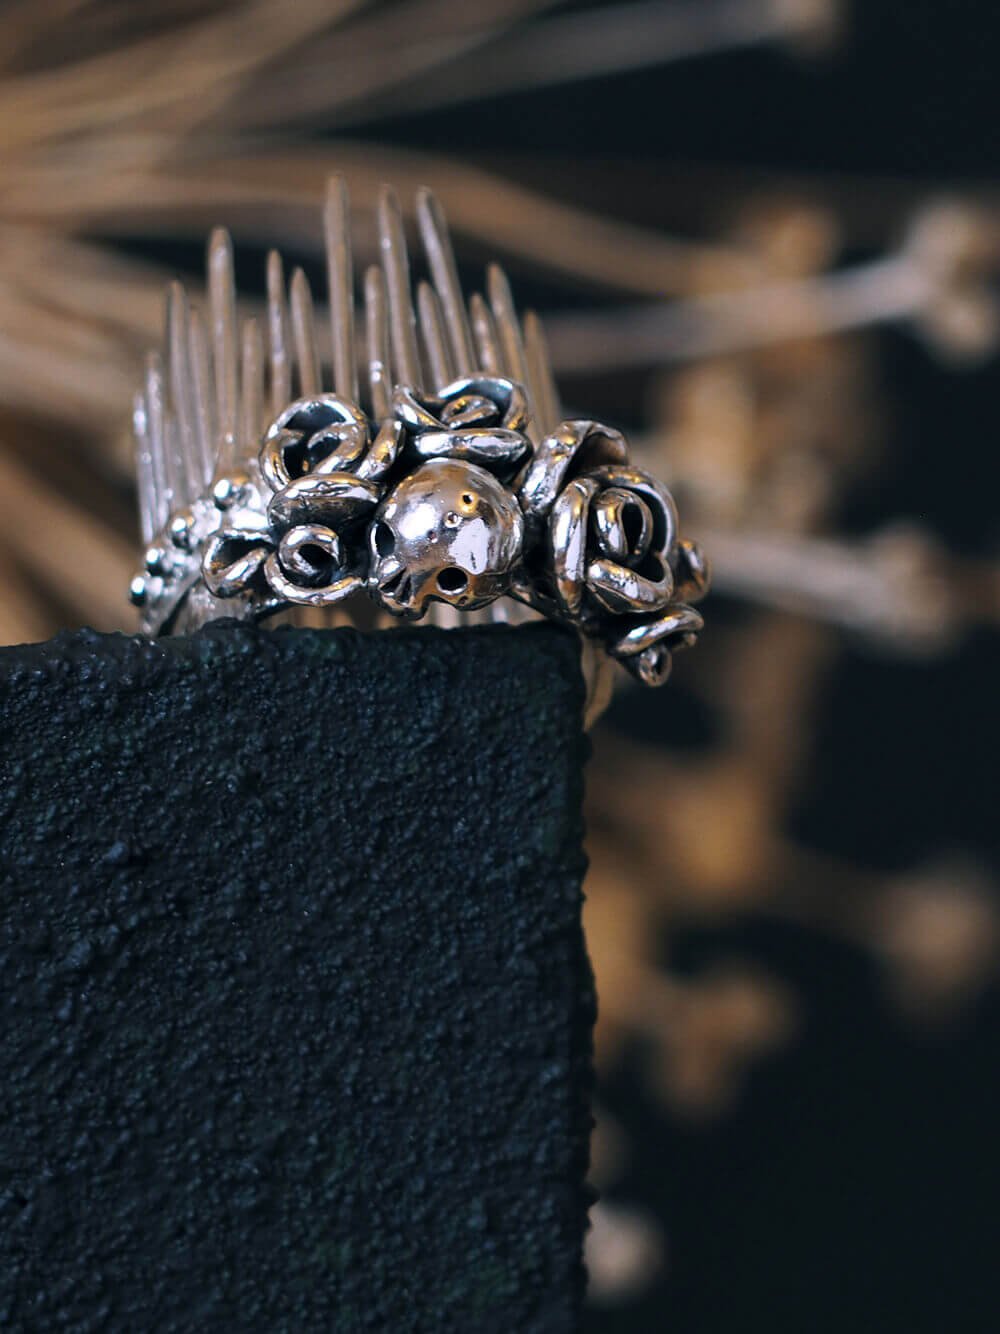 Bouquet-Skull-Ring-Spiked-Crown-Ring-Left-SLAB-Jewellery.jpg